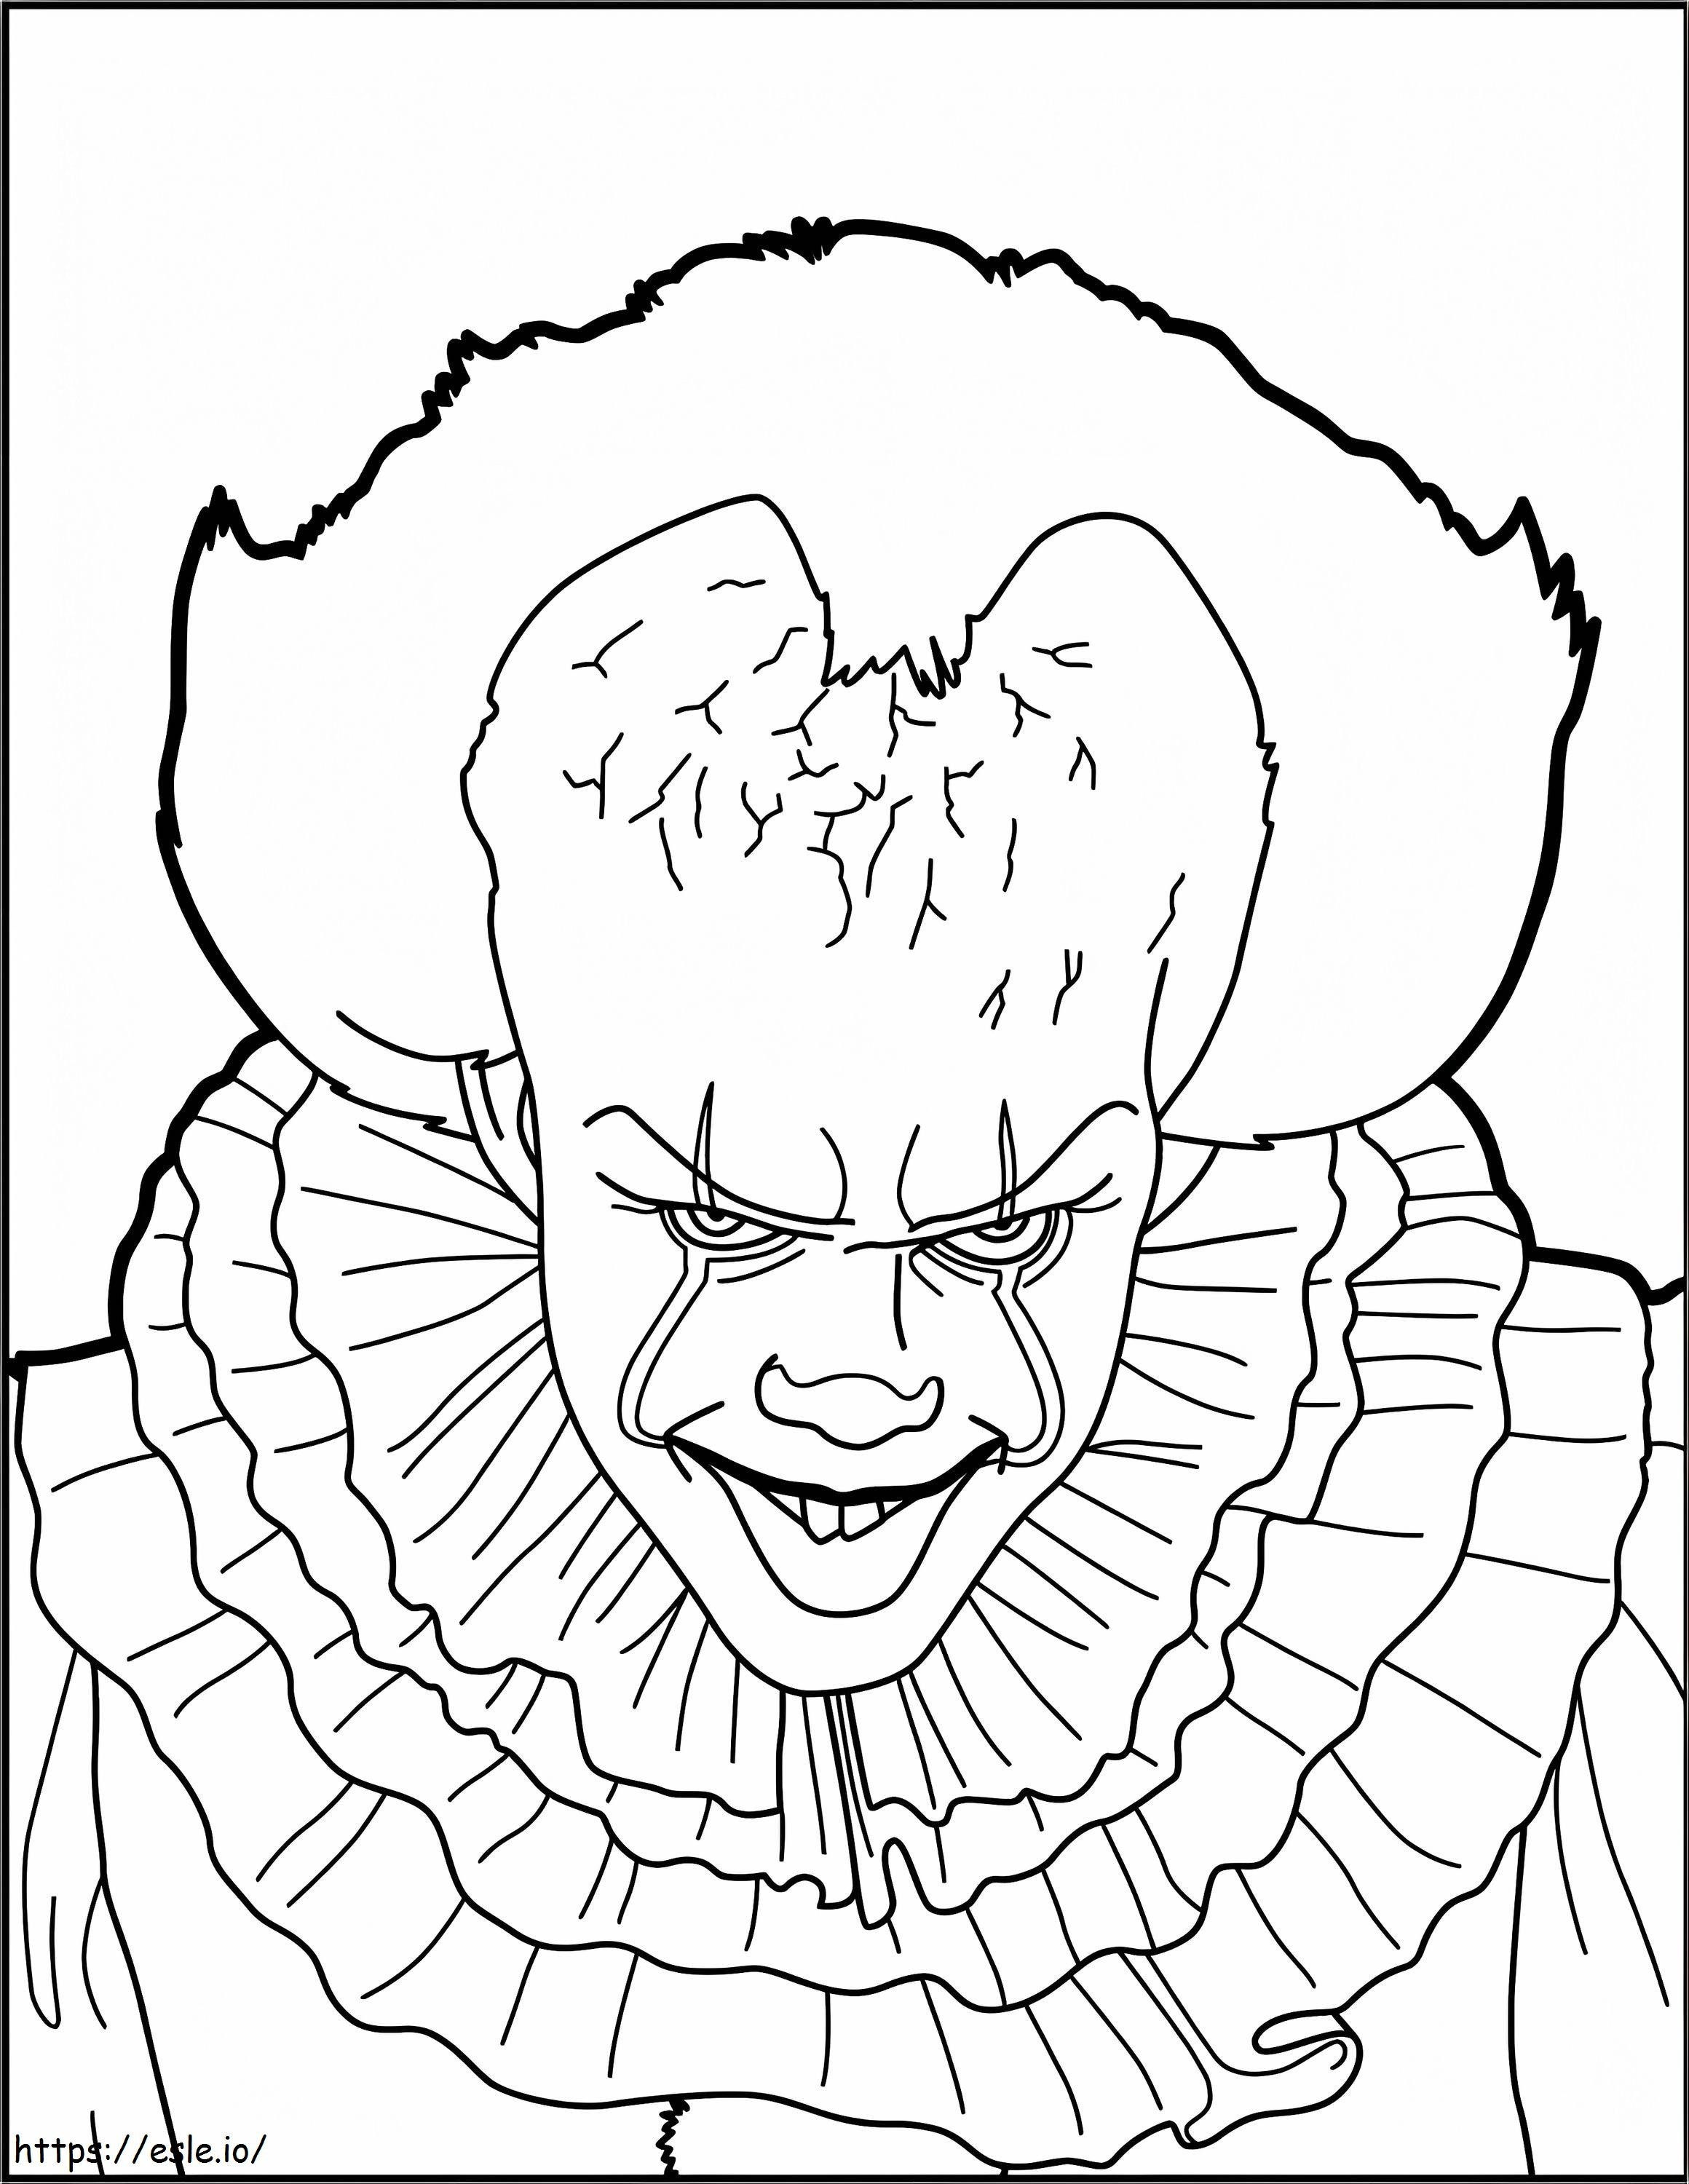 Pennywise coloring page